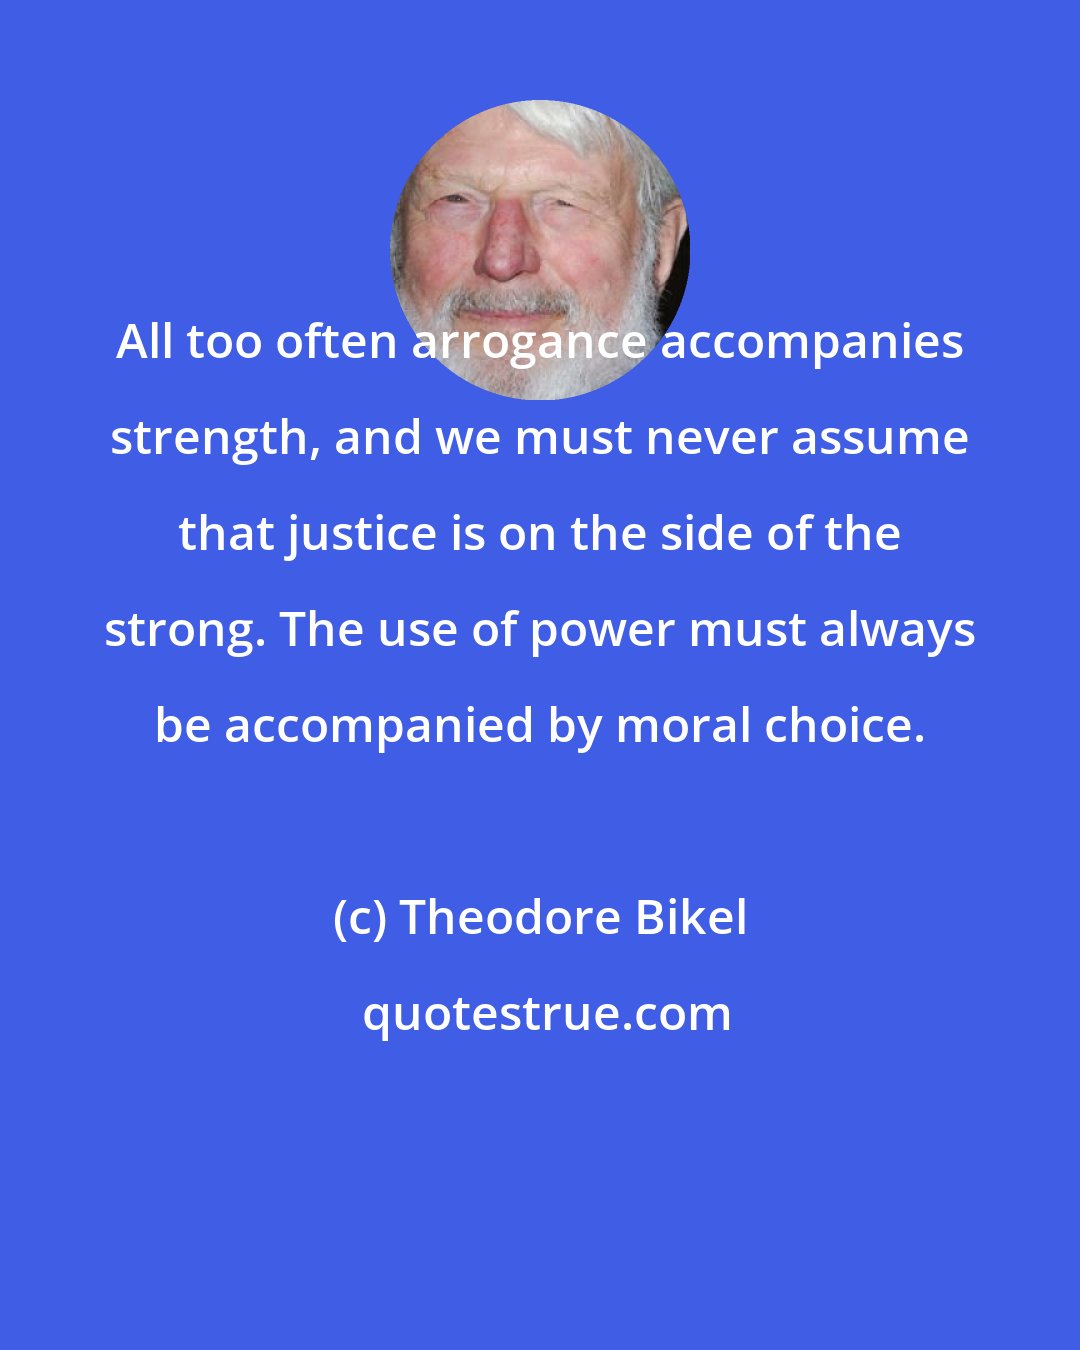 Theodore Bikel: All too often arrogance accompanies strength, and we must never assume that justice is on the side of the strong. The use of power must always be accompanied by moral choice.